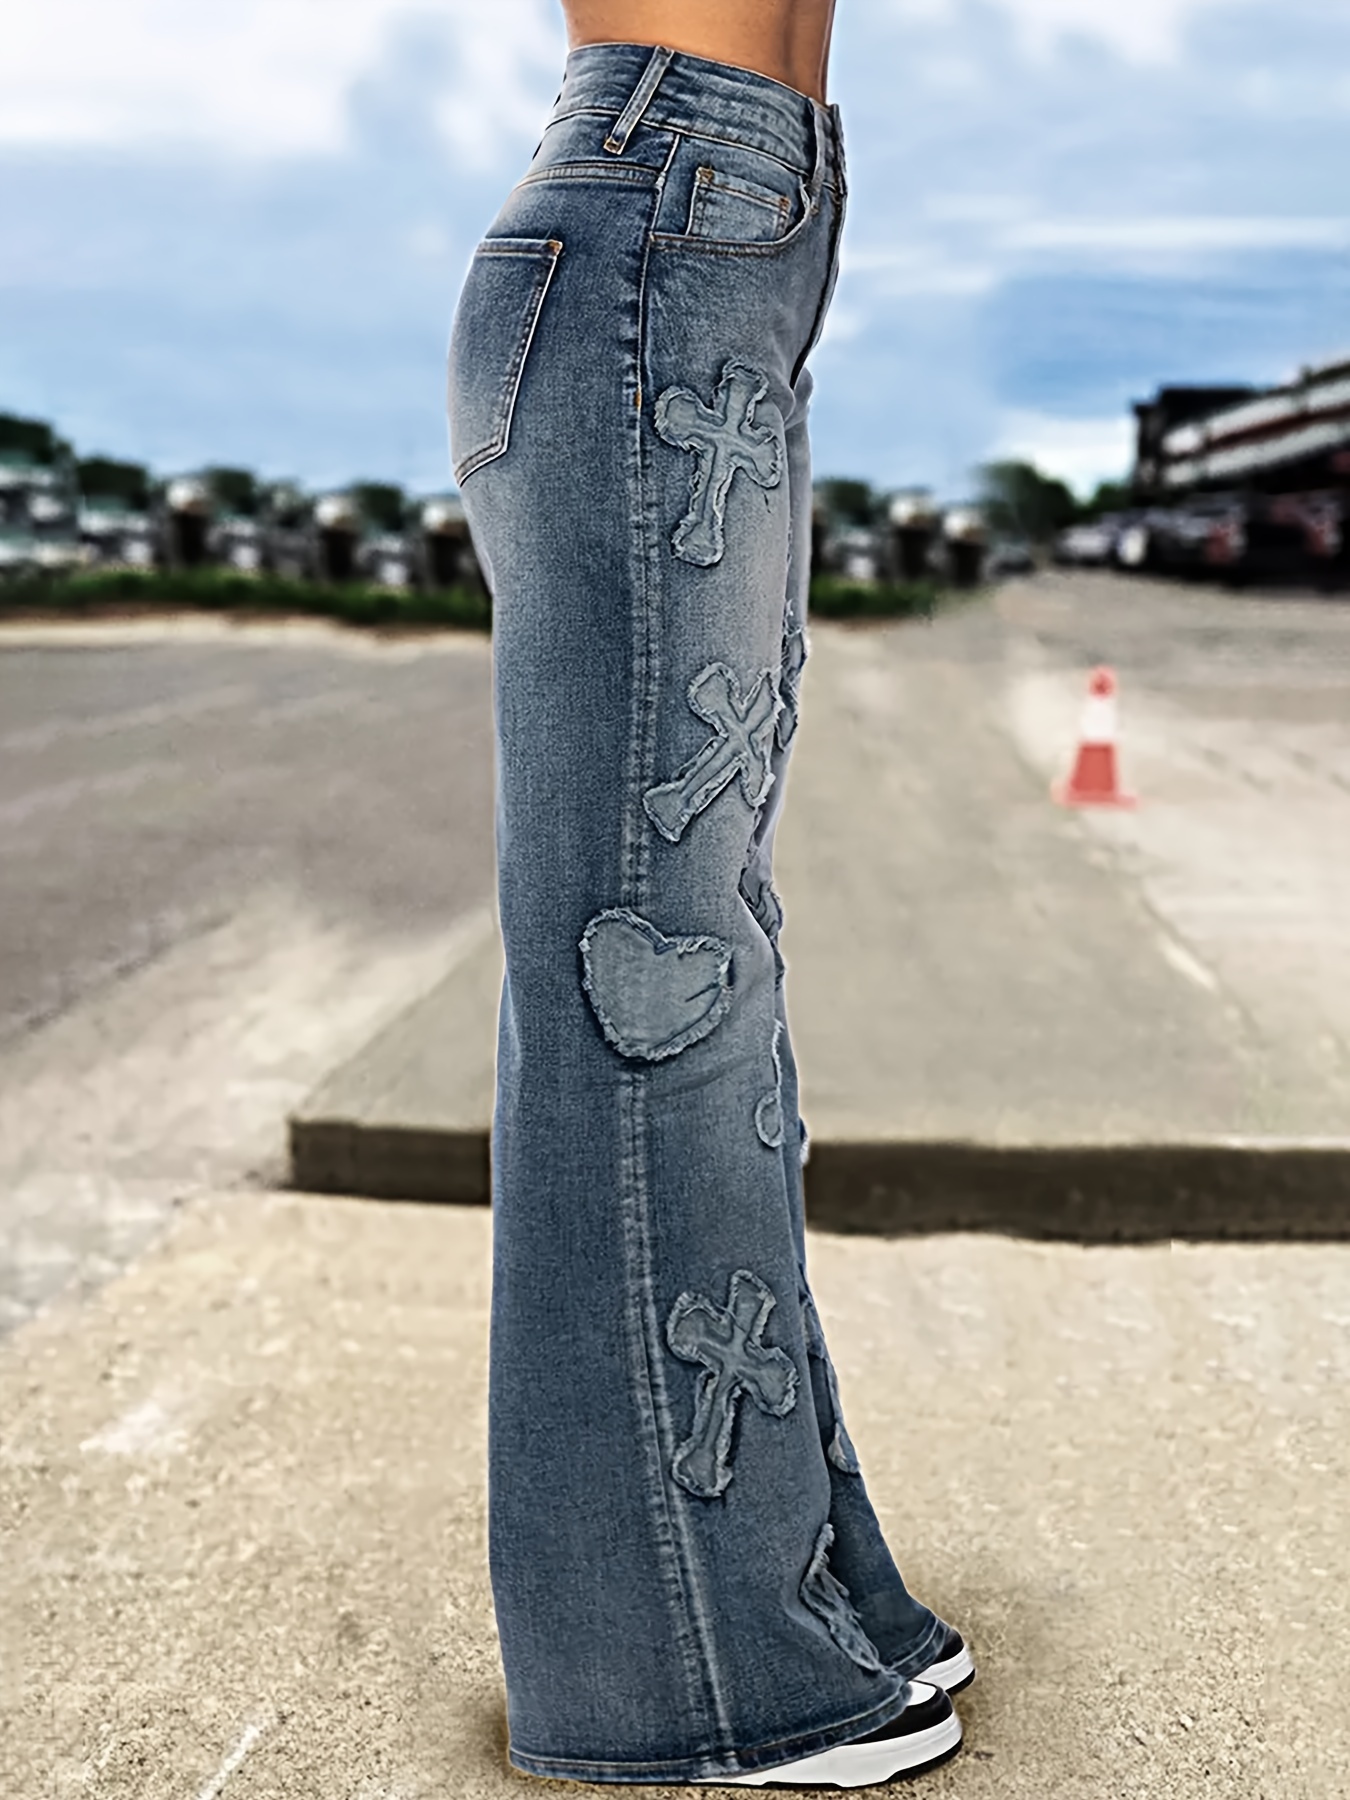 Stylish New Women Hole Patchwork Casual Denim Jeans Pants Bottom Trousers